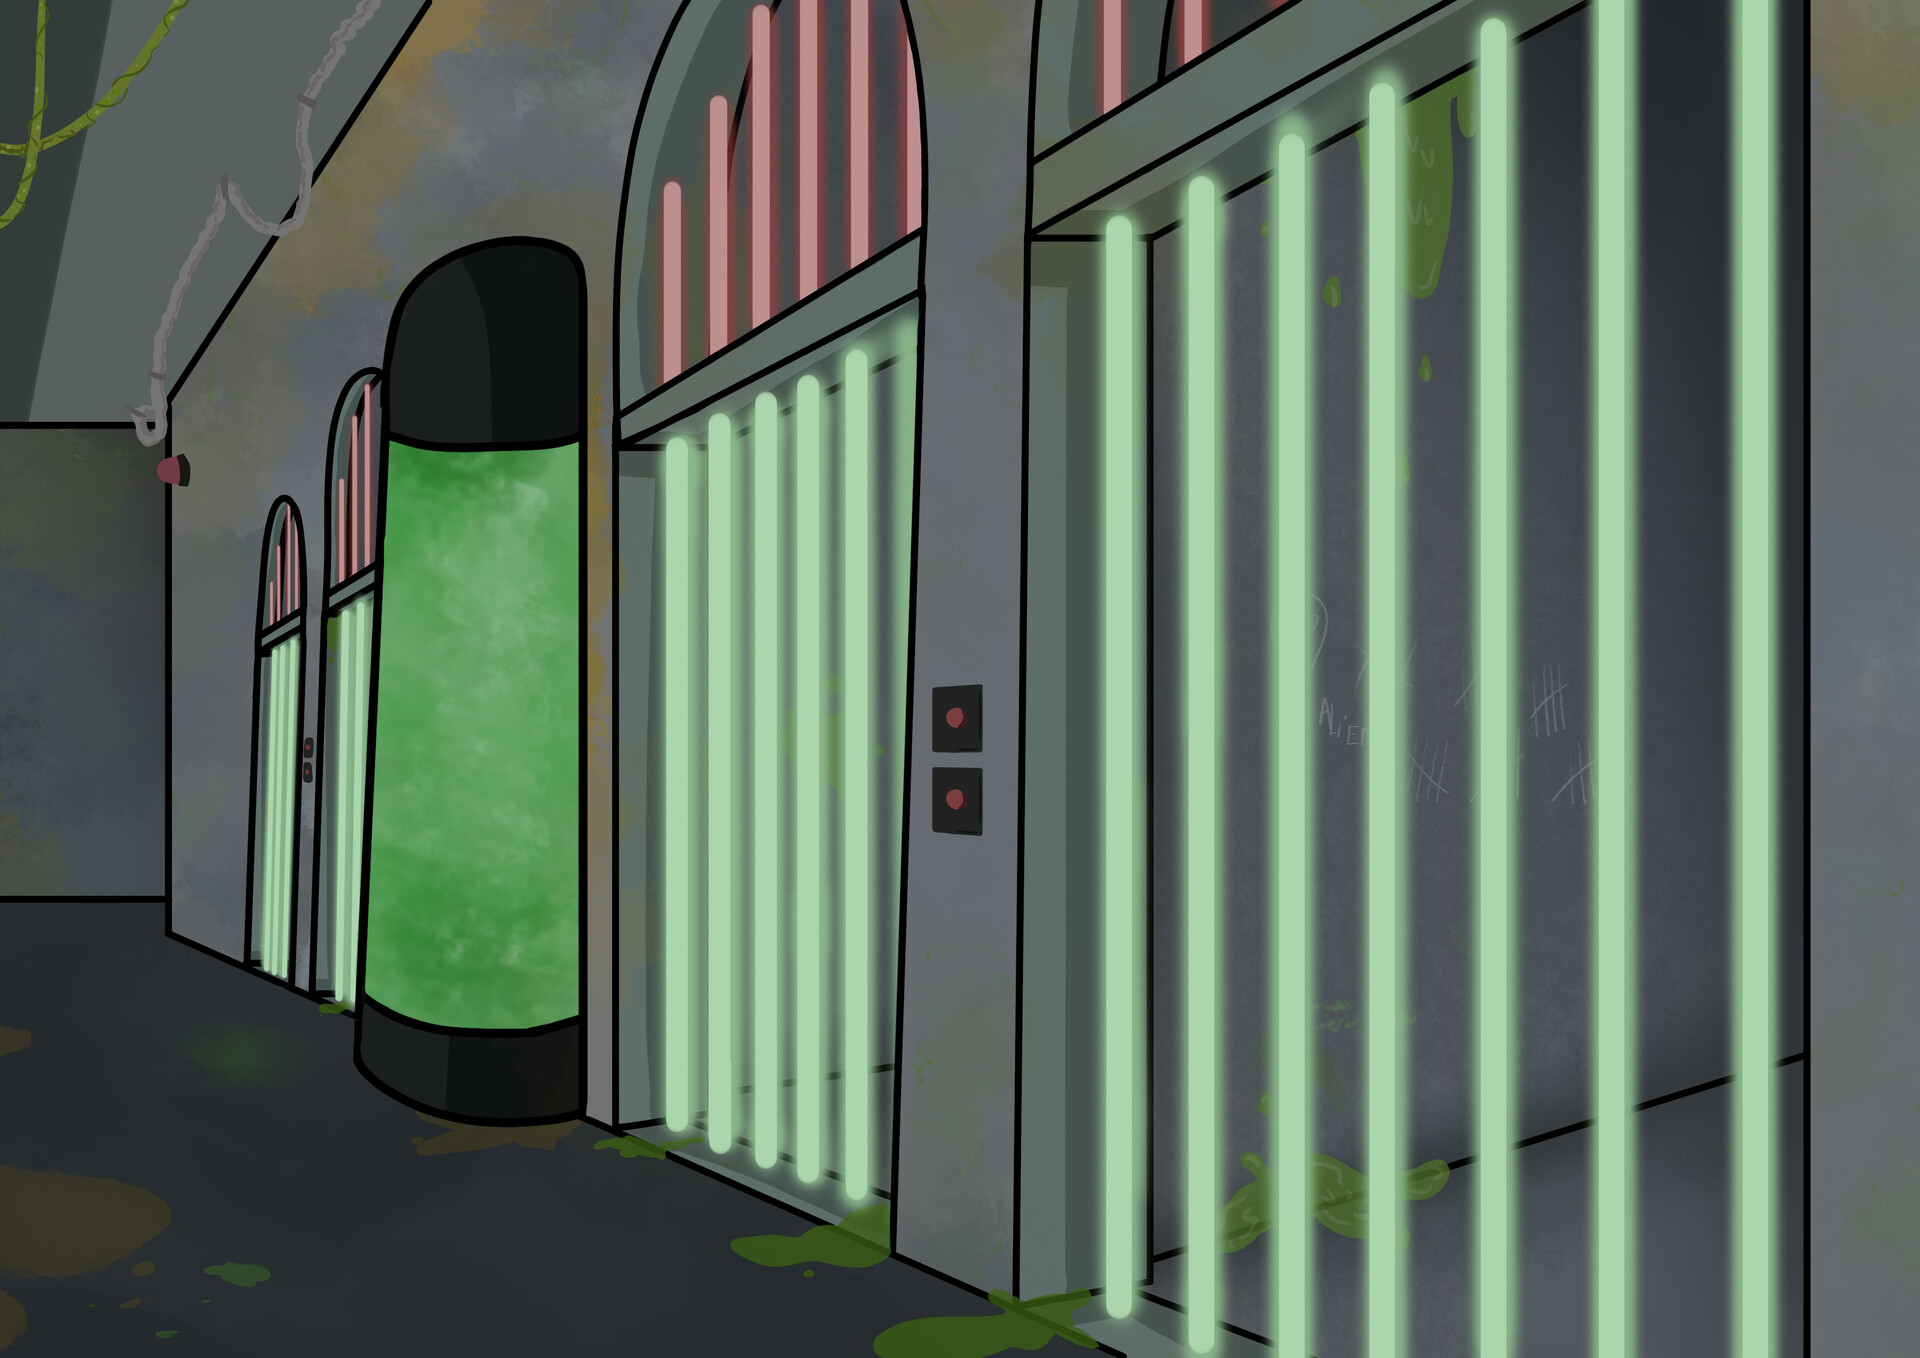 How To Escape From Prison  In today's animated educational